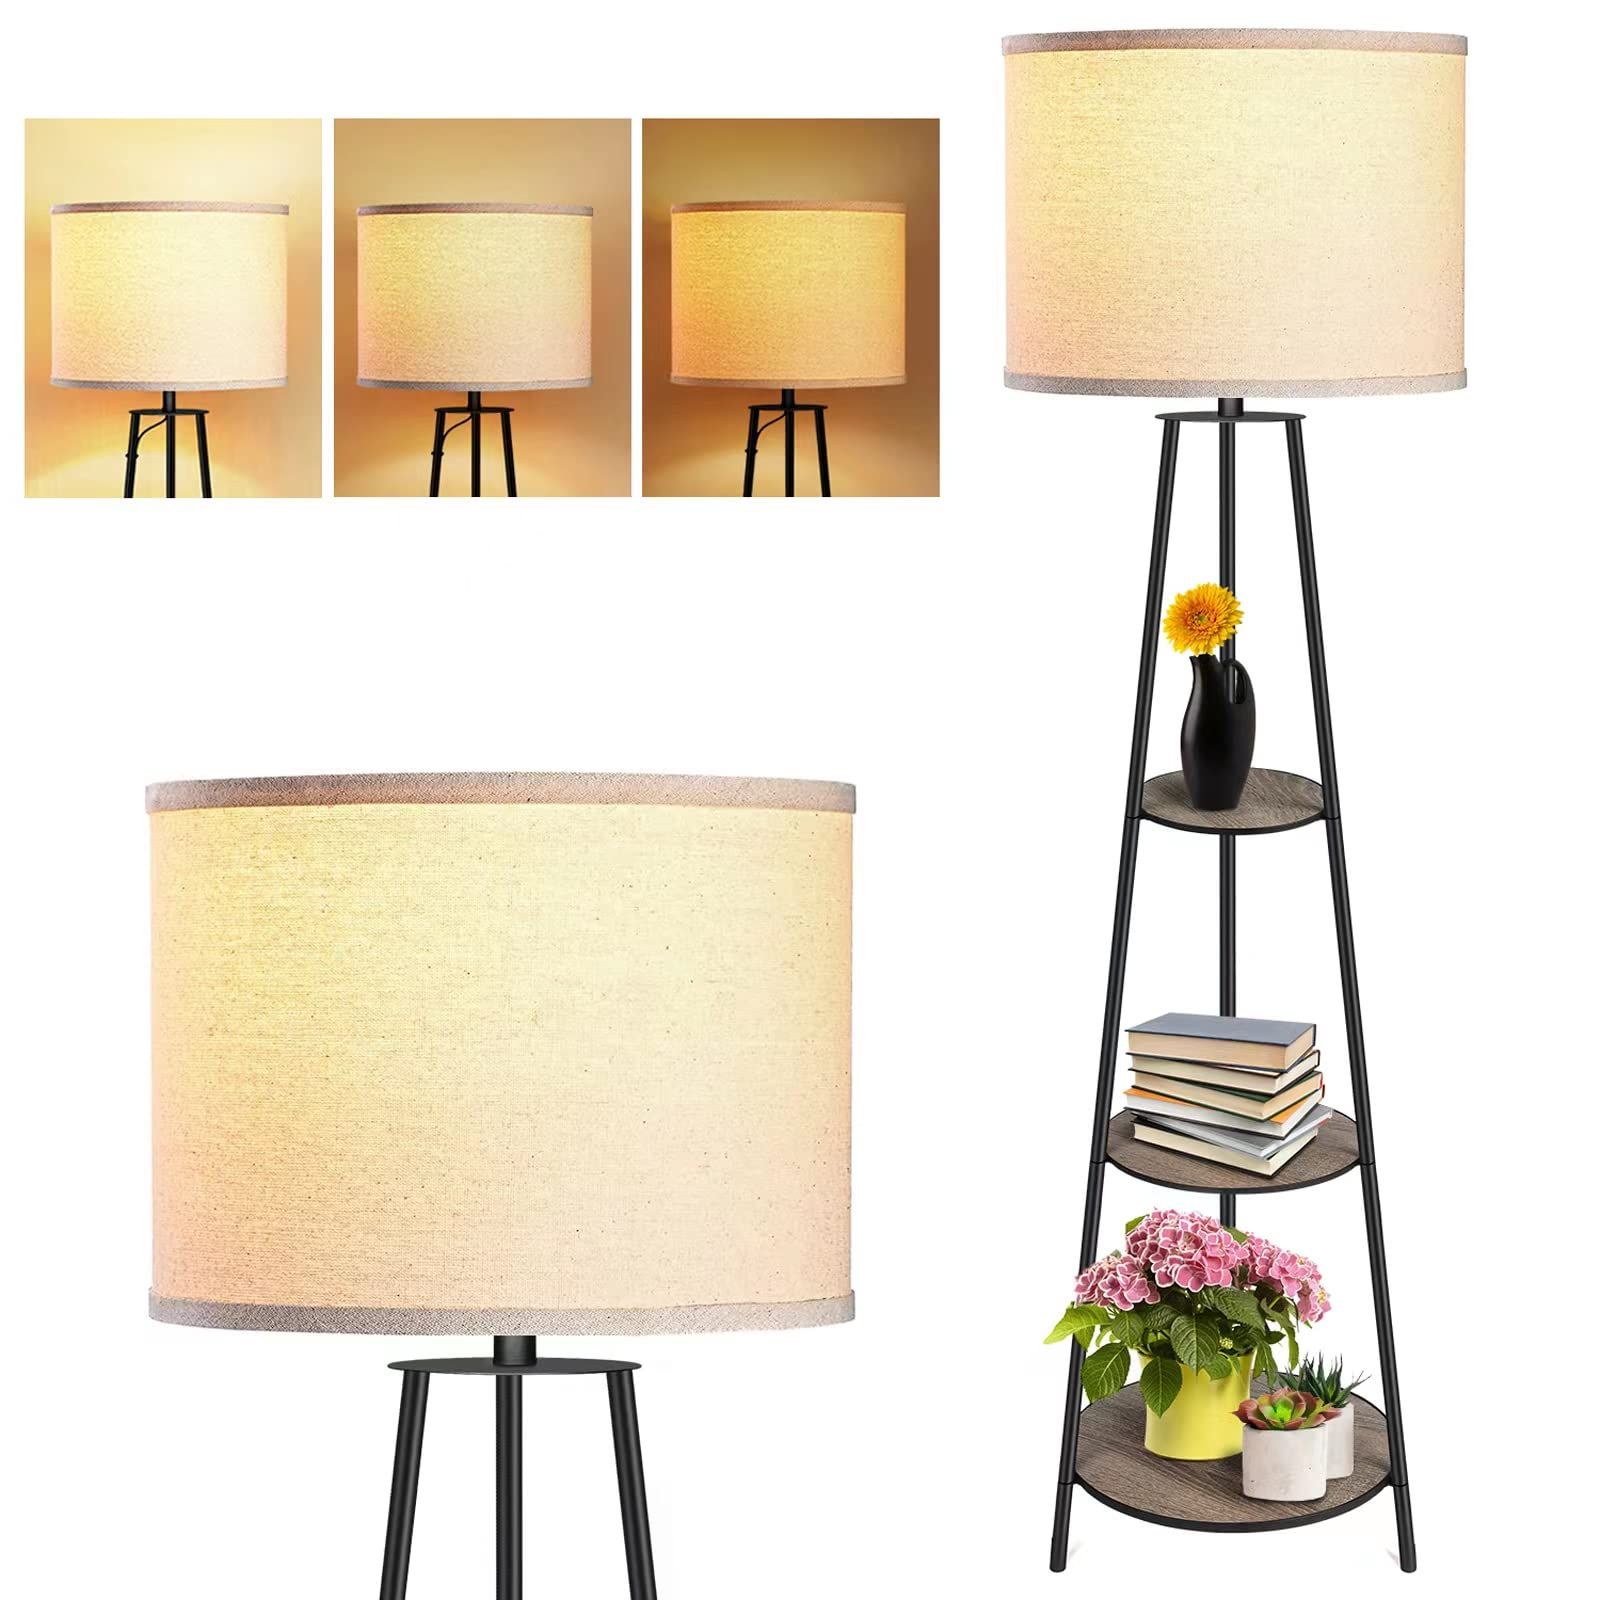 Most Recently Released Amazon: Floor Lamp, 3 Tier Round Corner Shelf Floor Lamp With 3  Dimmable Levels – Simple Standing Lamp With White Fabric Shade, Tall Modern Floor  Lamps With Shelves For Bedroom, Living Room And Regarding 3 Tier Standing Lamps (View 1 of 15)